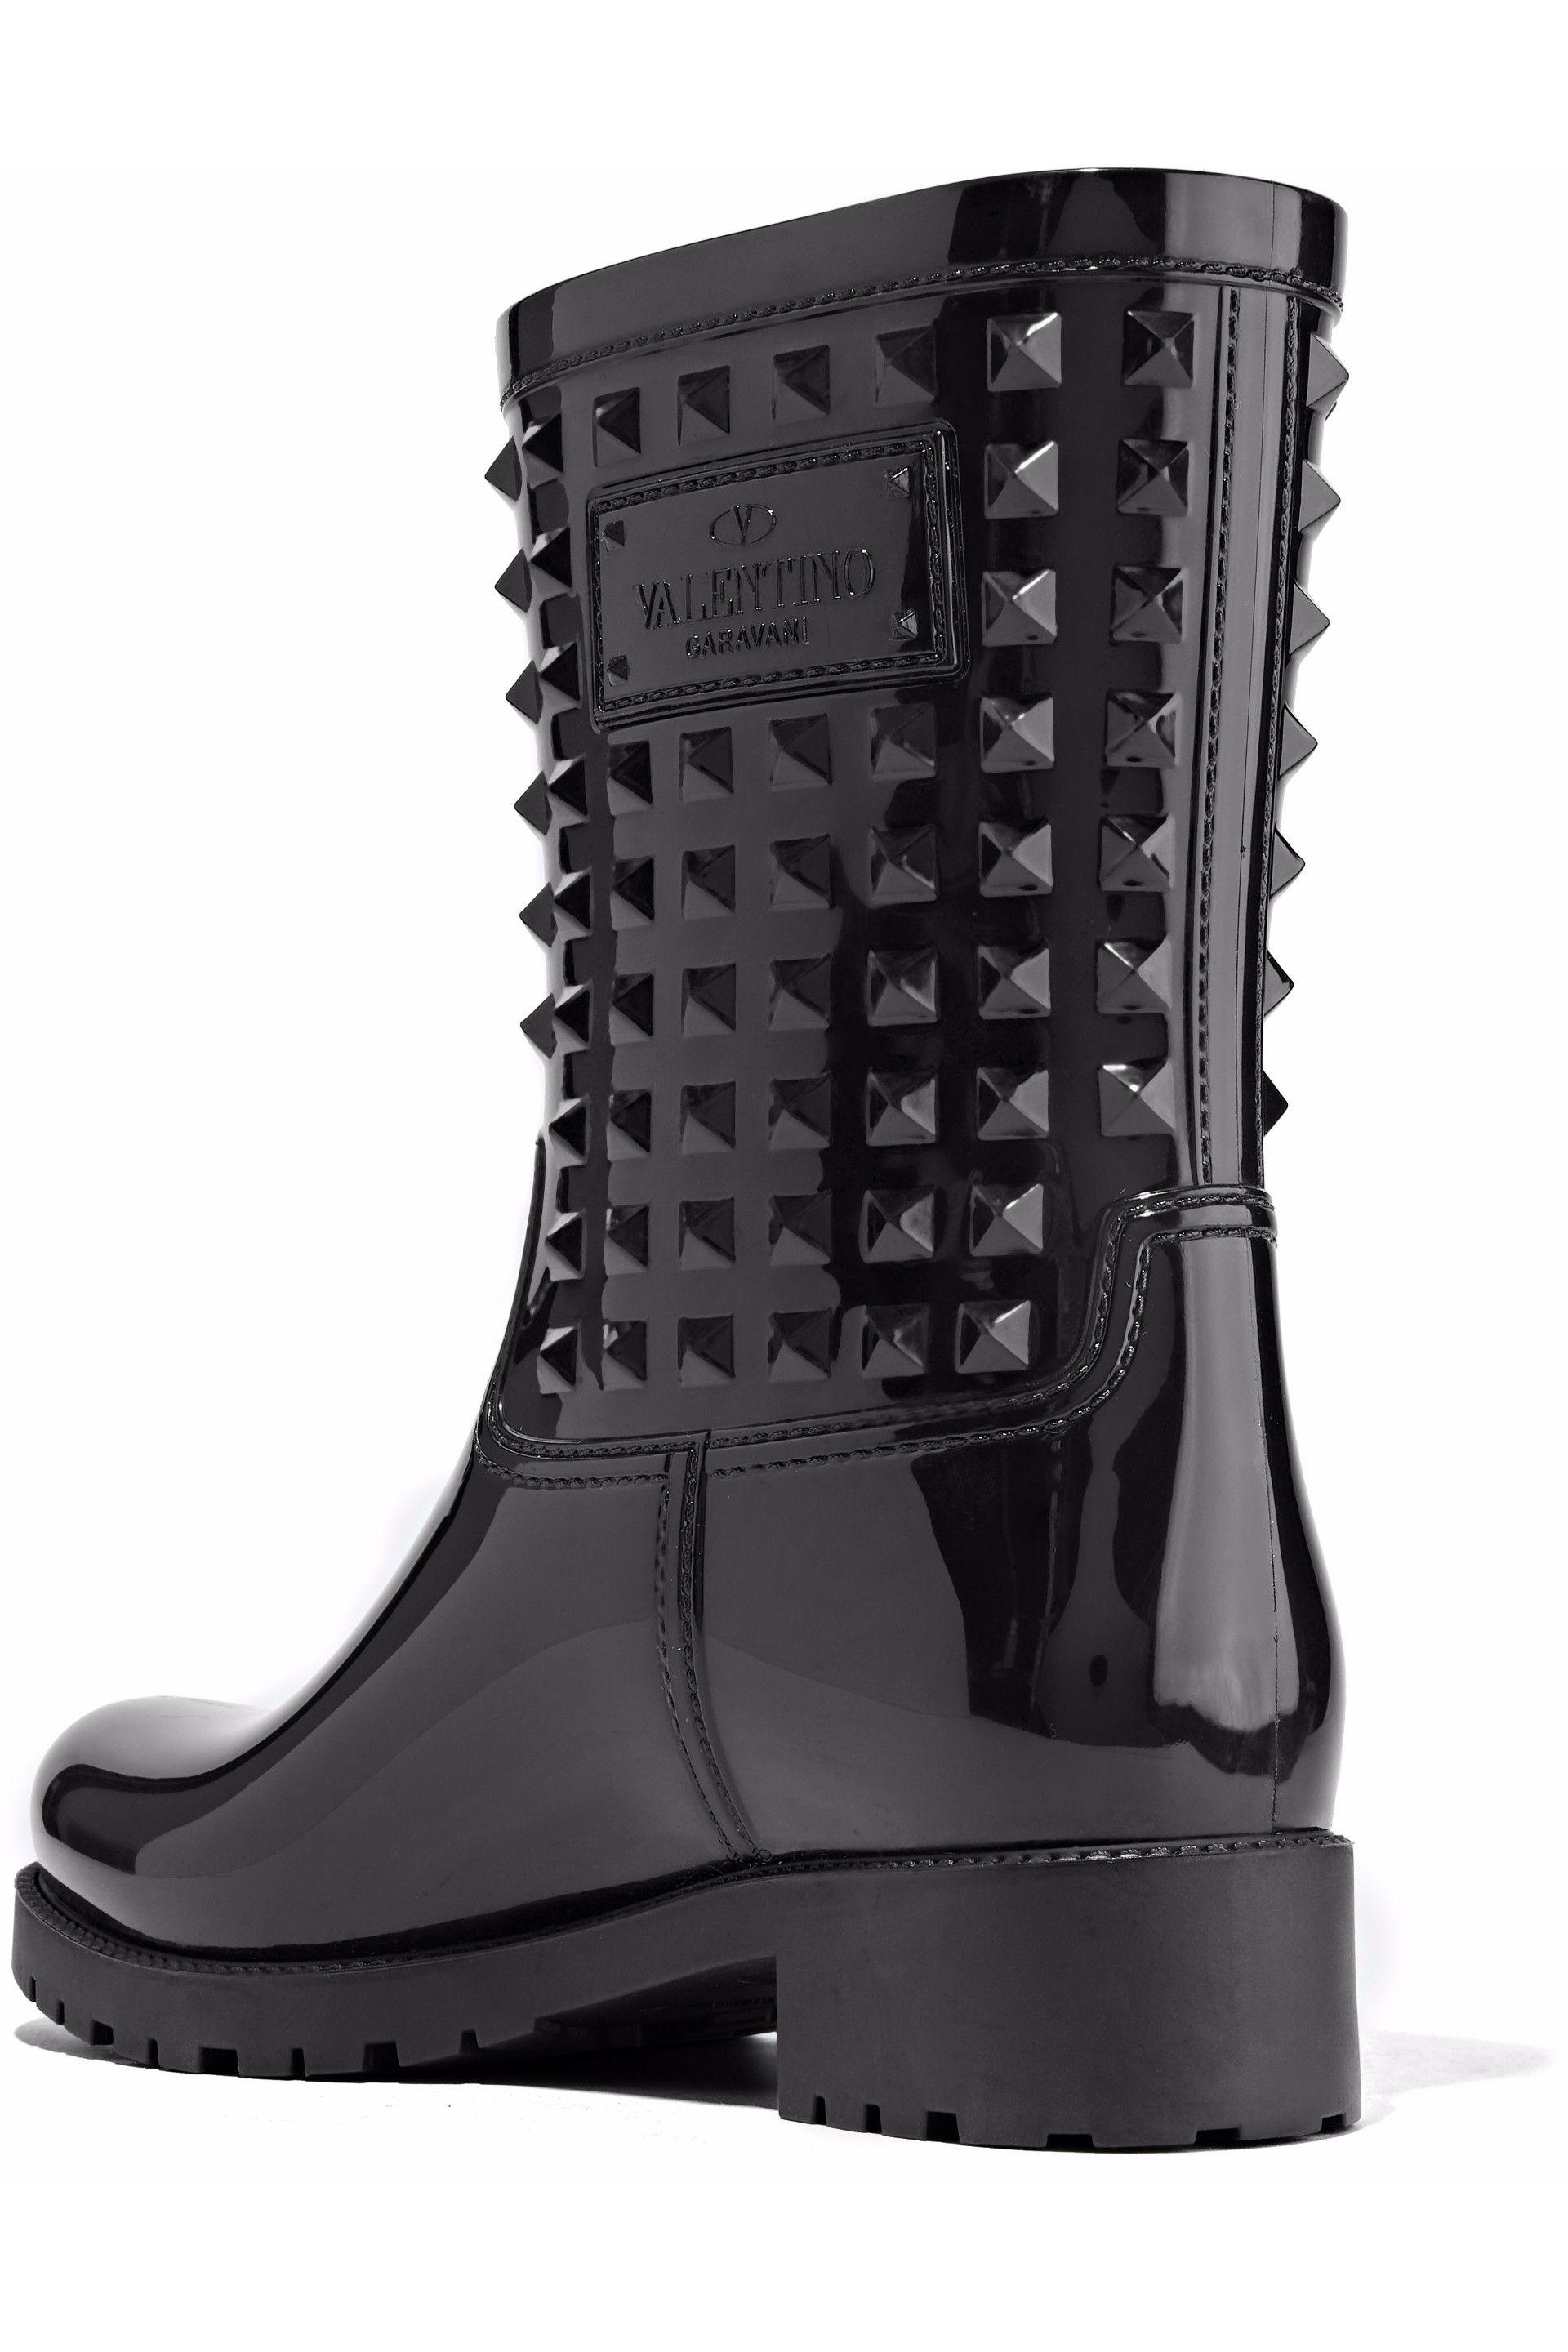 Valentino The Rockstud Glossed-rubber Rain Boots in Black - Lyst